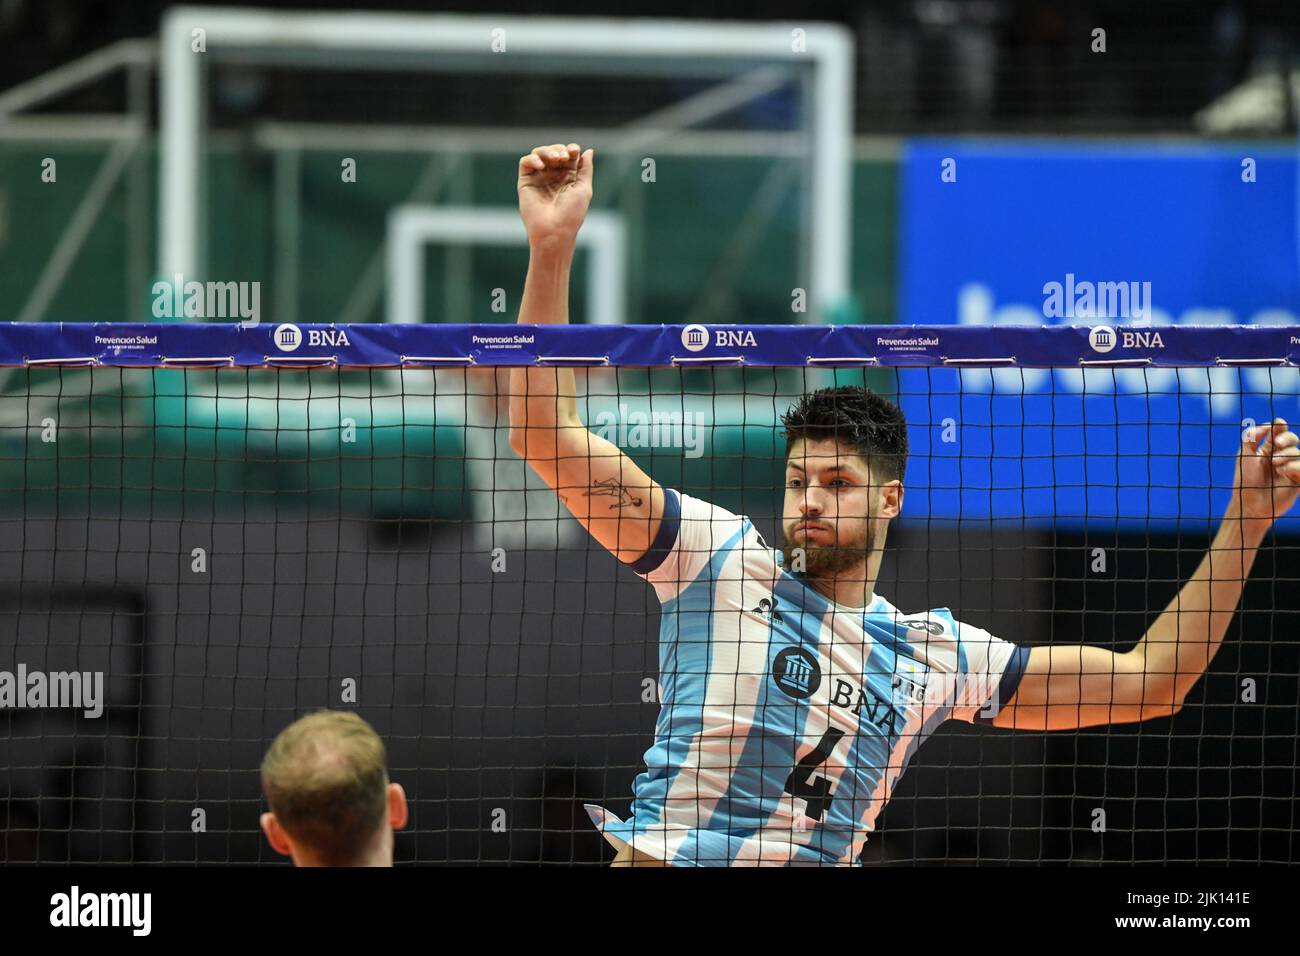 Joaquin Gallego (Argentina) vs. Netherlands. Exhibition game, Buenos Aires. Stock Photo